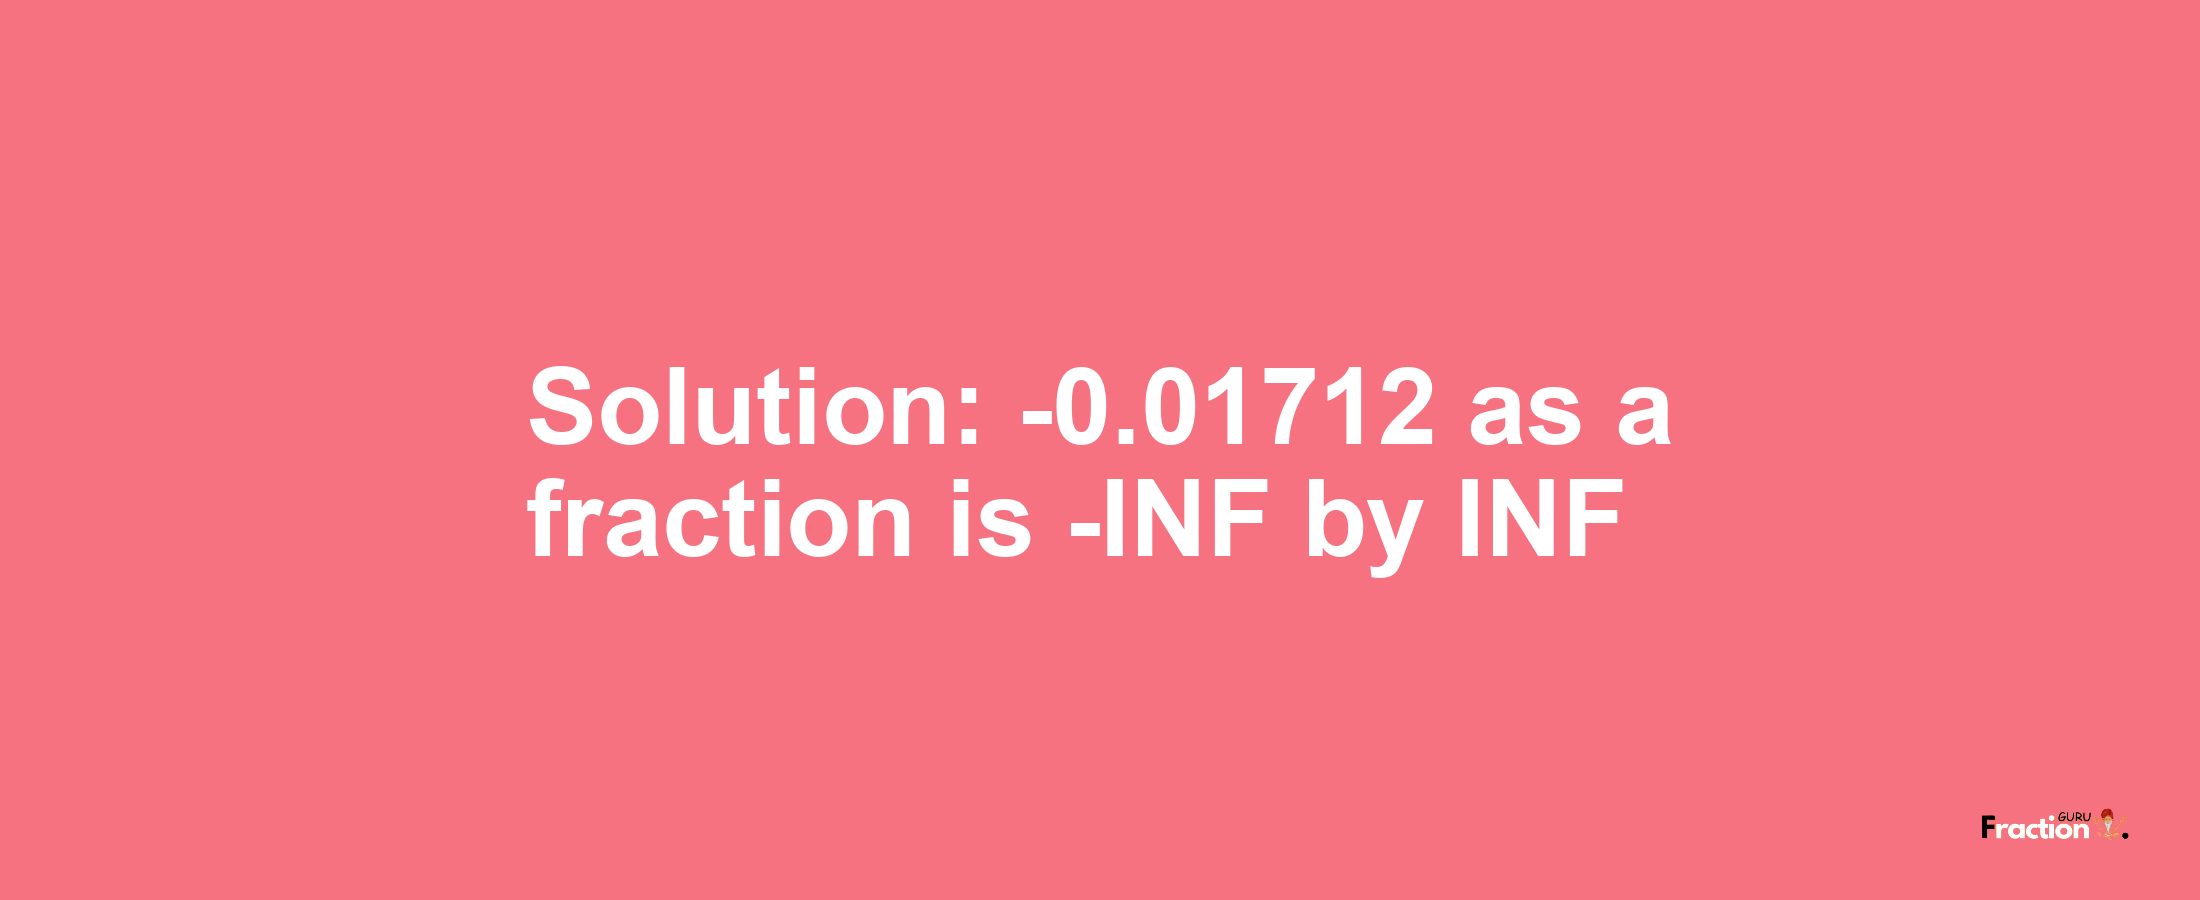 Solution:-0.01712 as a fraction is -INF/INF